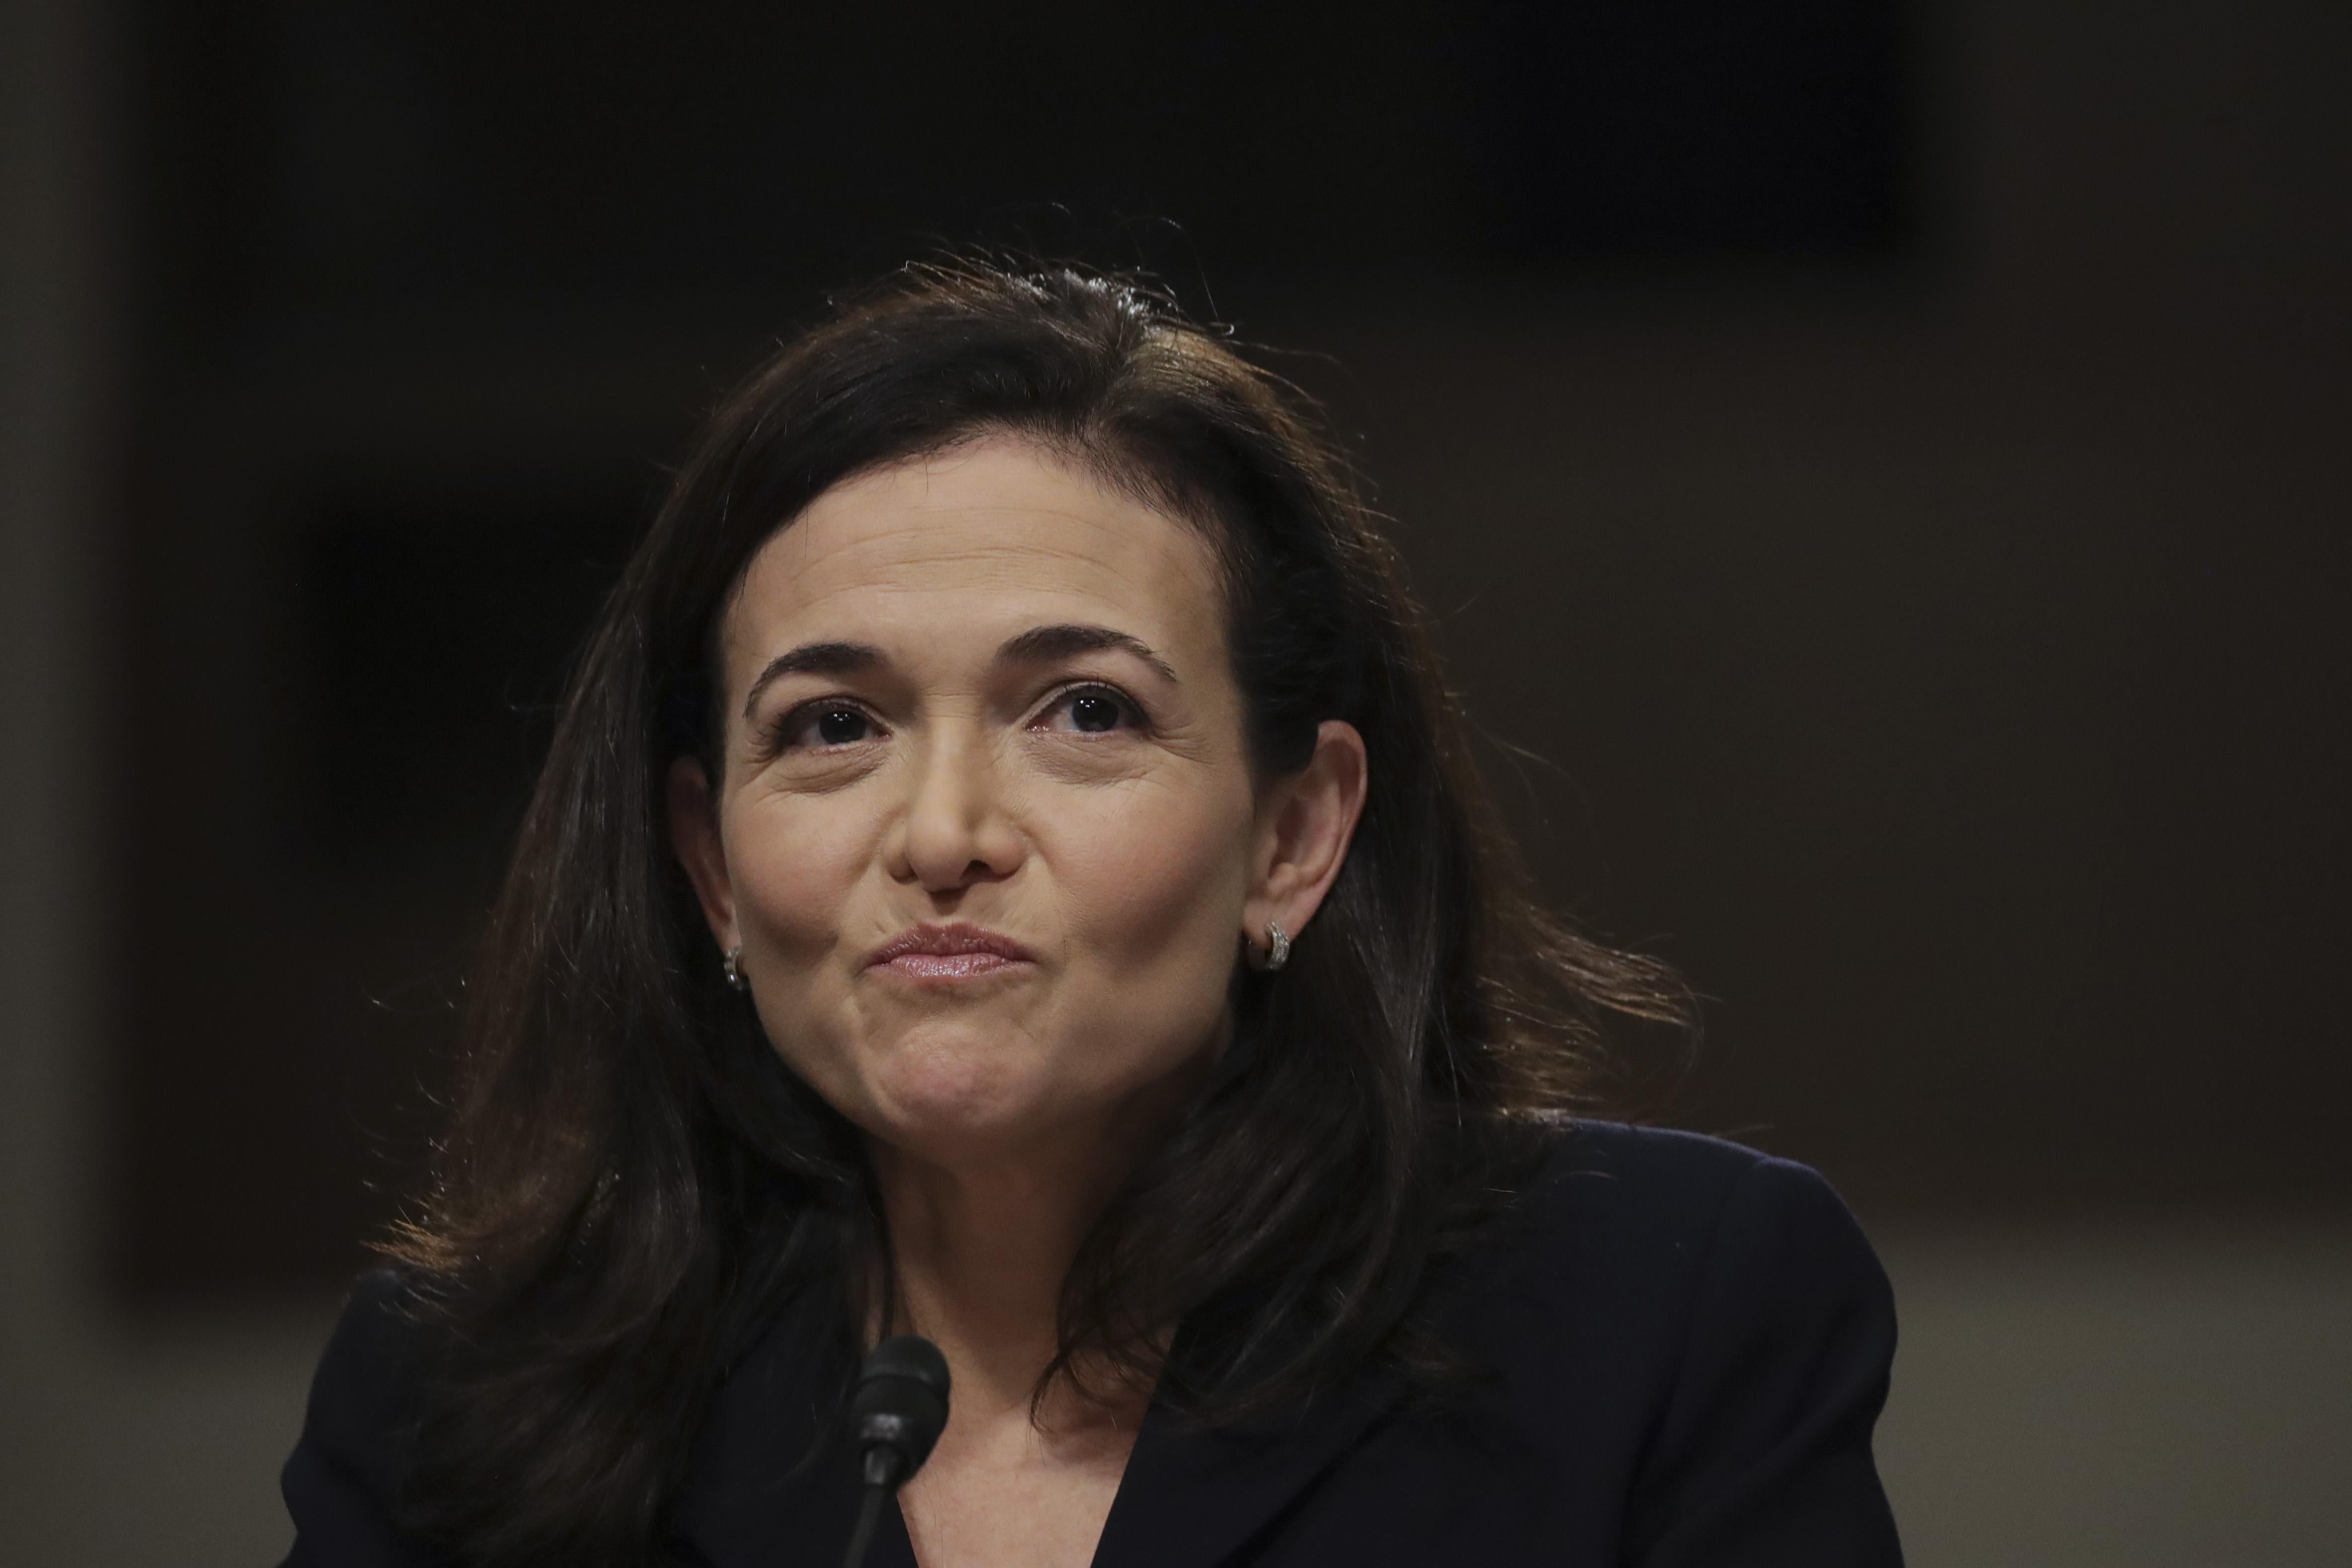 Facebook chief operating officer Sheryl Sandberg testifies during a Senate Intelligence Committee hearing concerning foreign influence operations' use of social media platforms, on Capitol Hill, September 5, 2018 in Washington, DC.